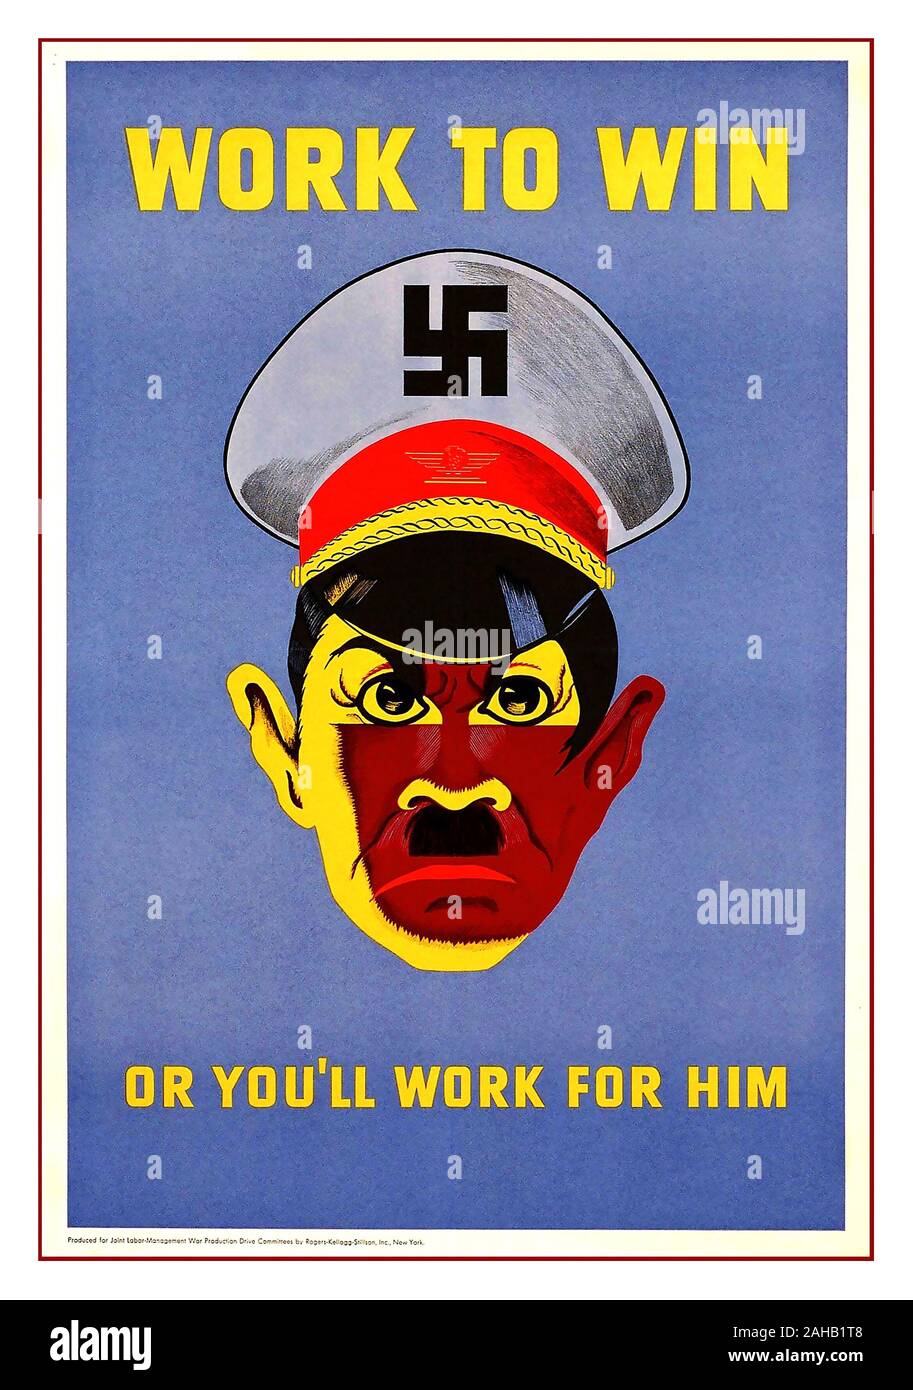 Vintage World War II Propaganda Poster with Adolf Hitler and Swastika Army Cap cartoon 'work to win' 'or you'll work for him' War effort poster reminding people to work hard to win the war Stock Photo